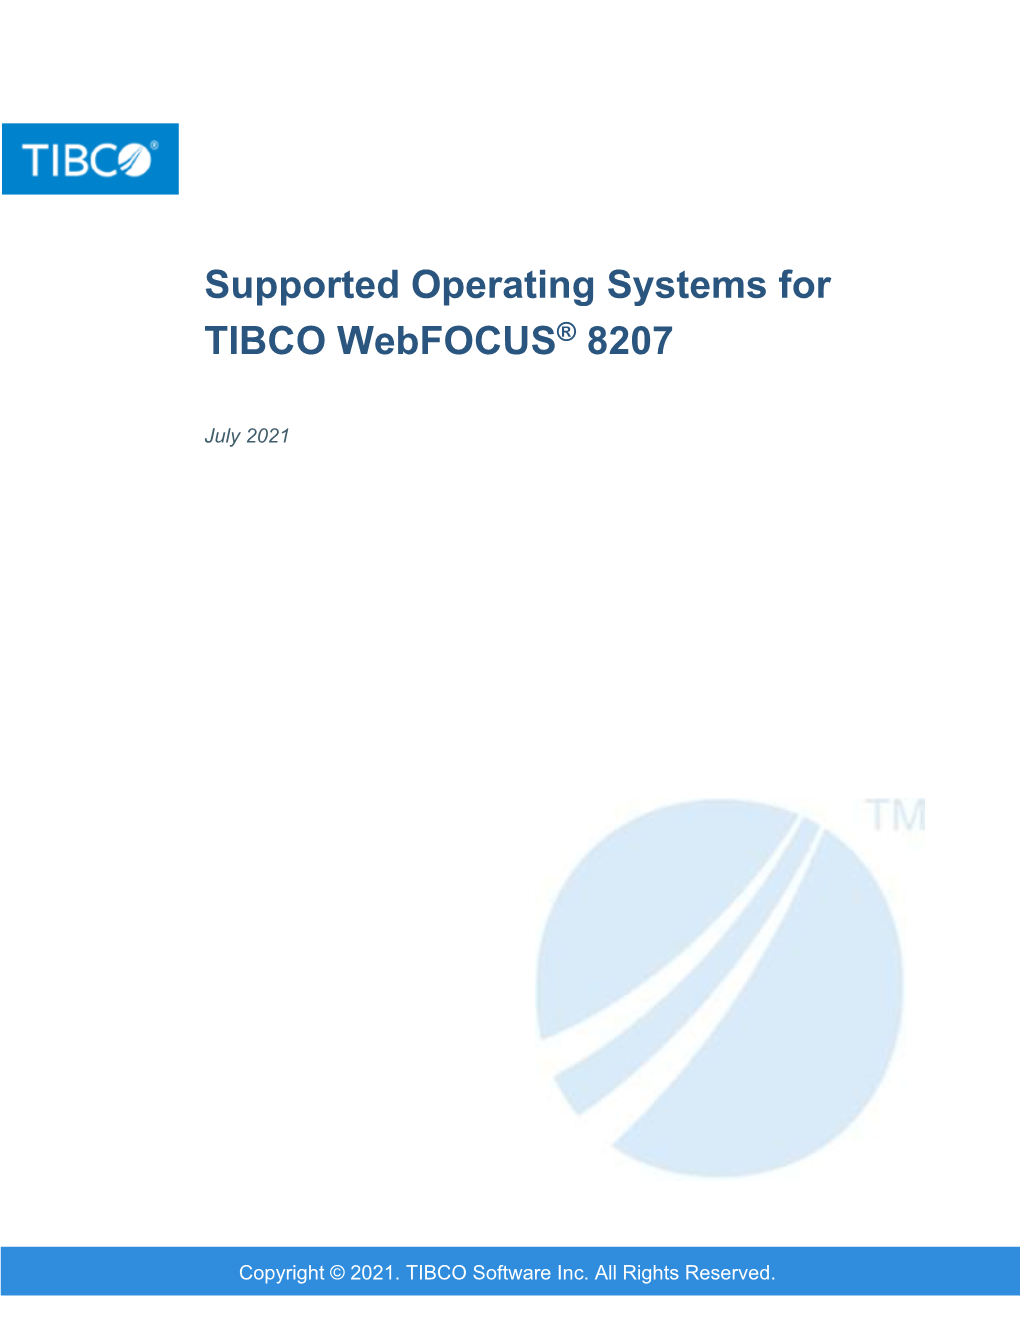 Supported Operating Systems for TIBCO Webfocus 8207